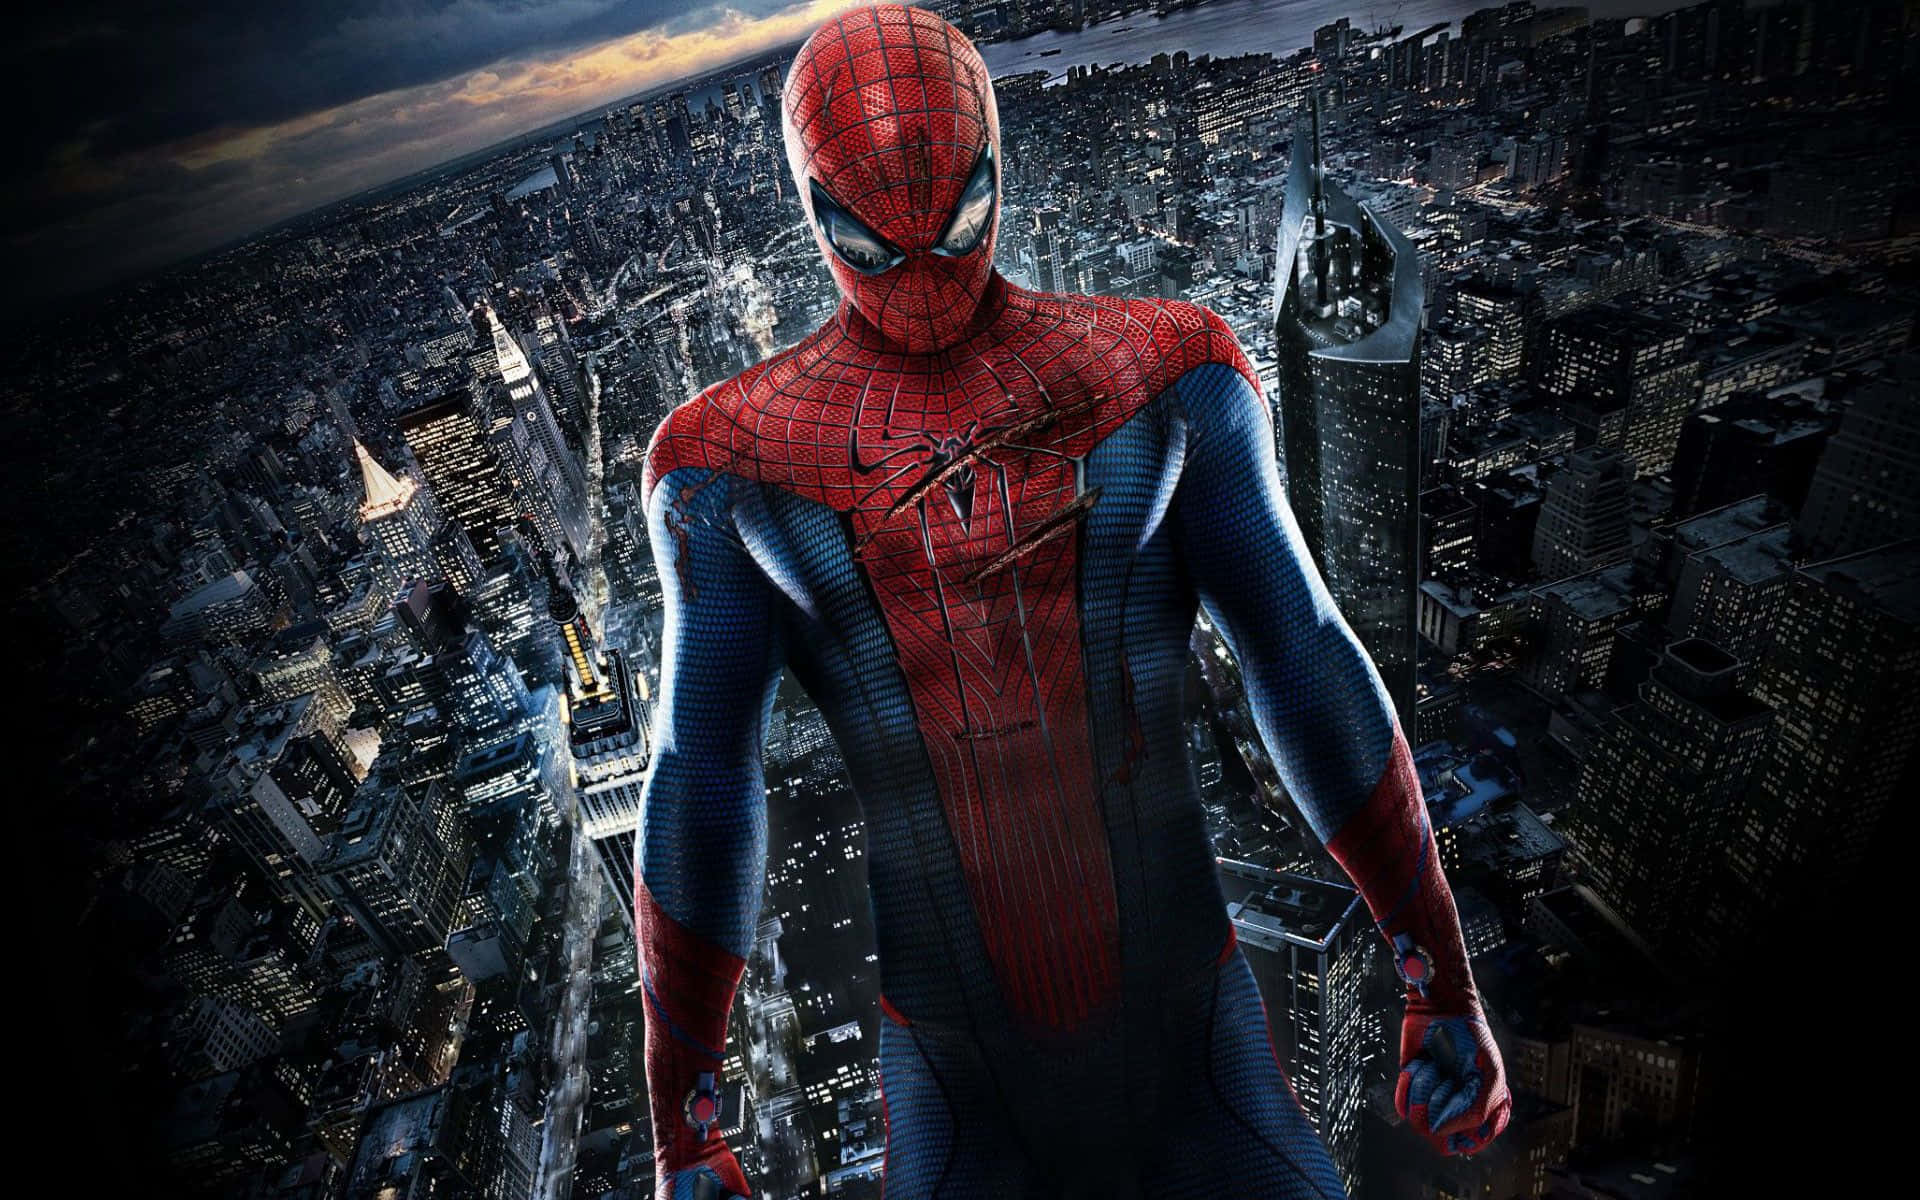 The Amazing Spider Man, As He Swings Through The City Landscape. Wallpaper